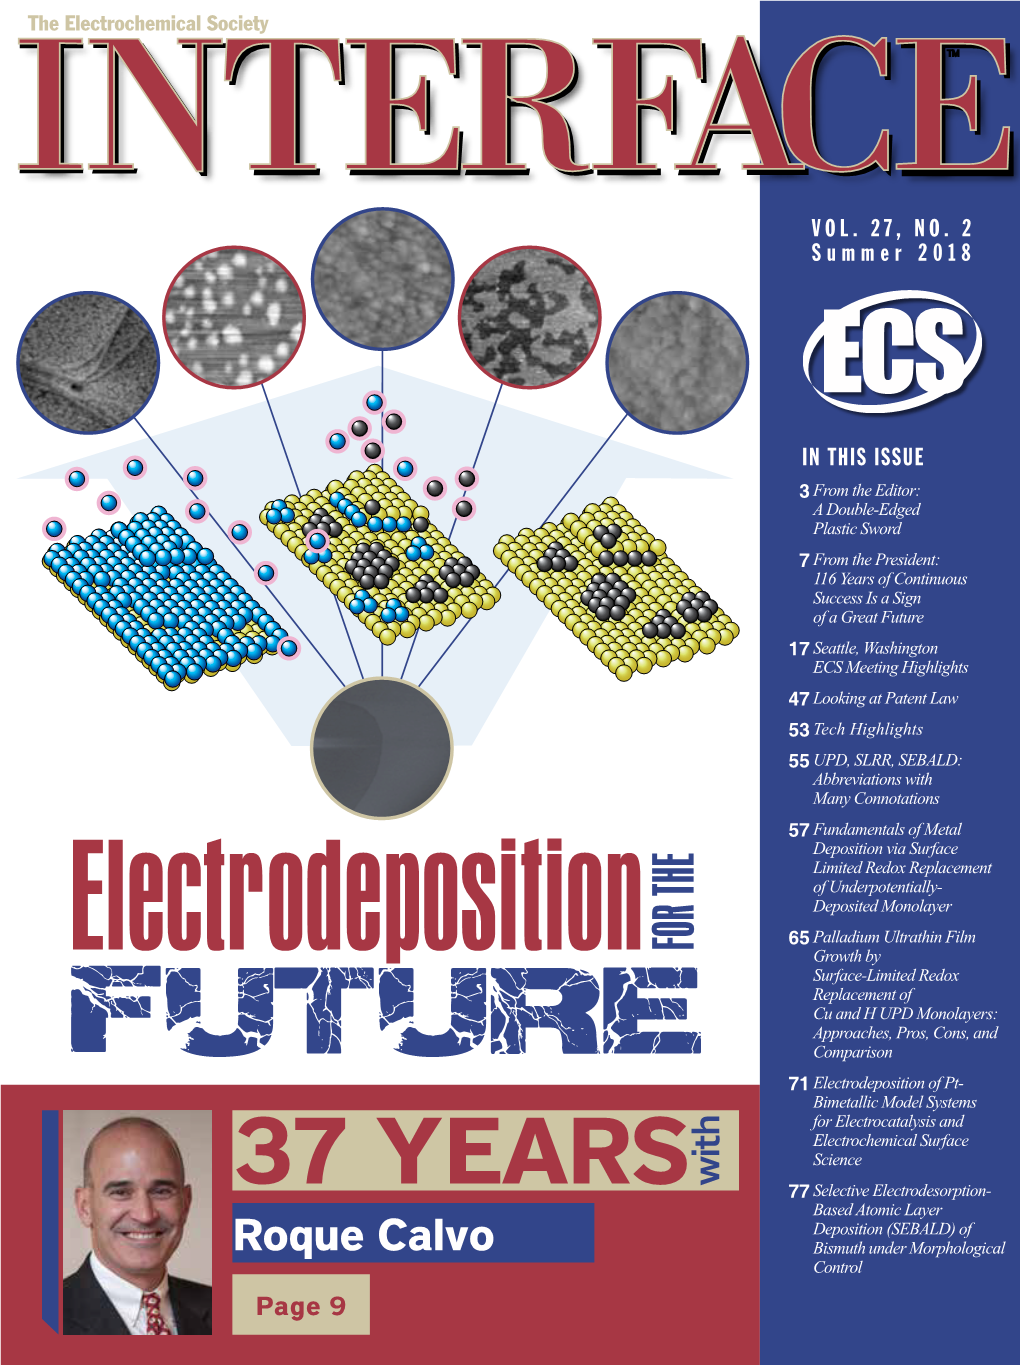 37 Years with Selective Electrodesorption- 77 Based Atomic Layer Deposition (SEBALD) of Roque Calvo Bismuth Under Morphological Control Page 9